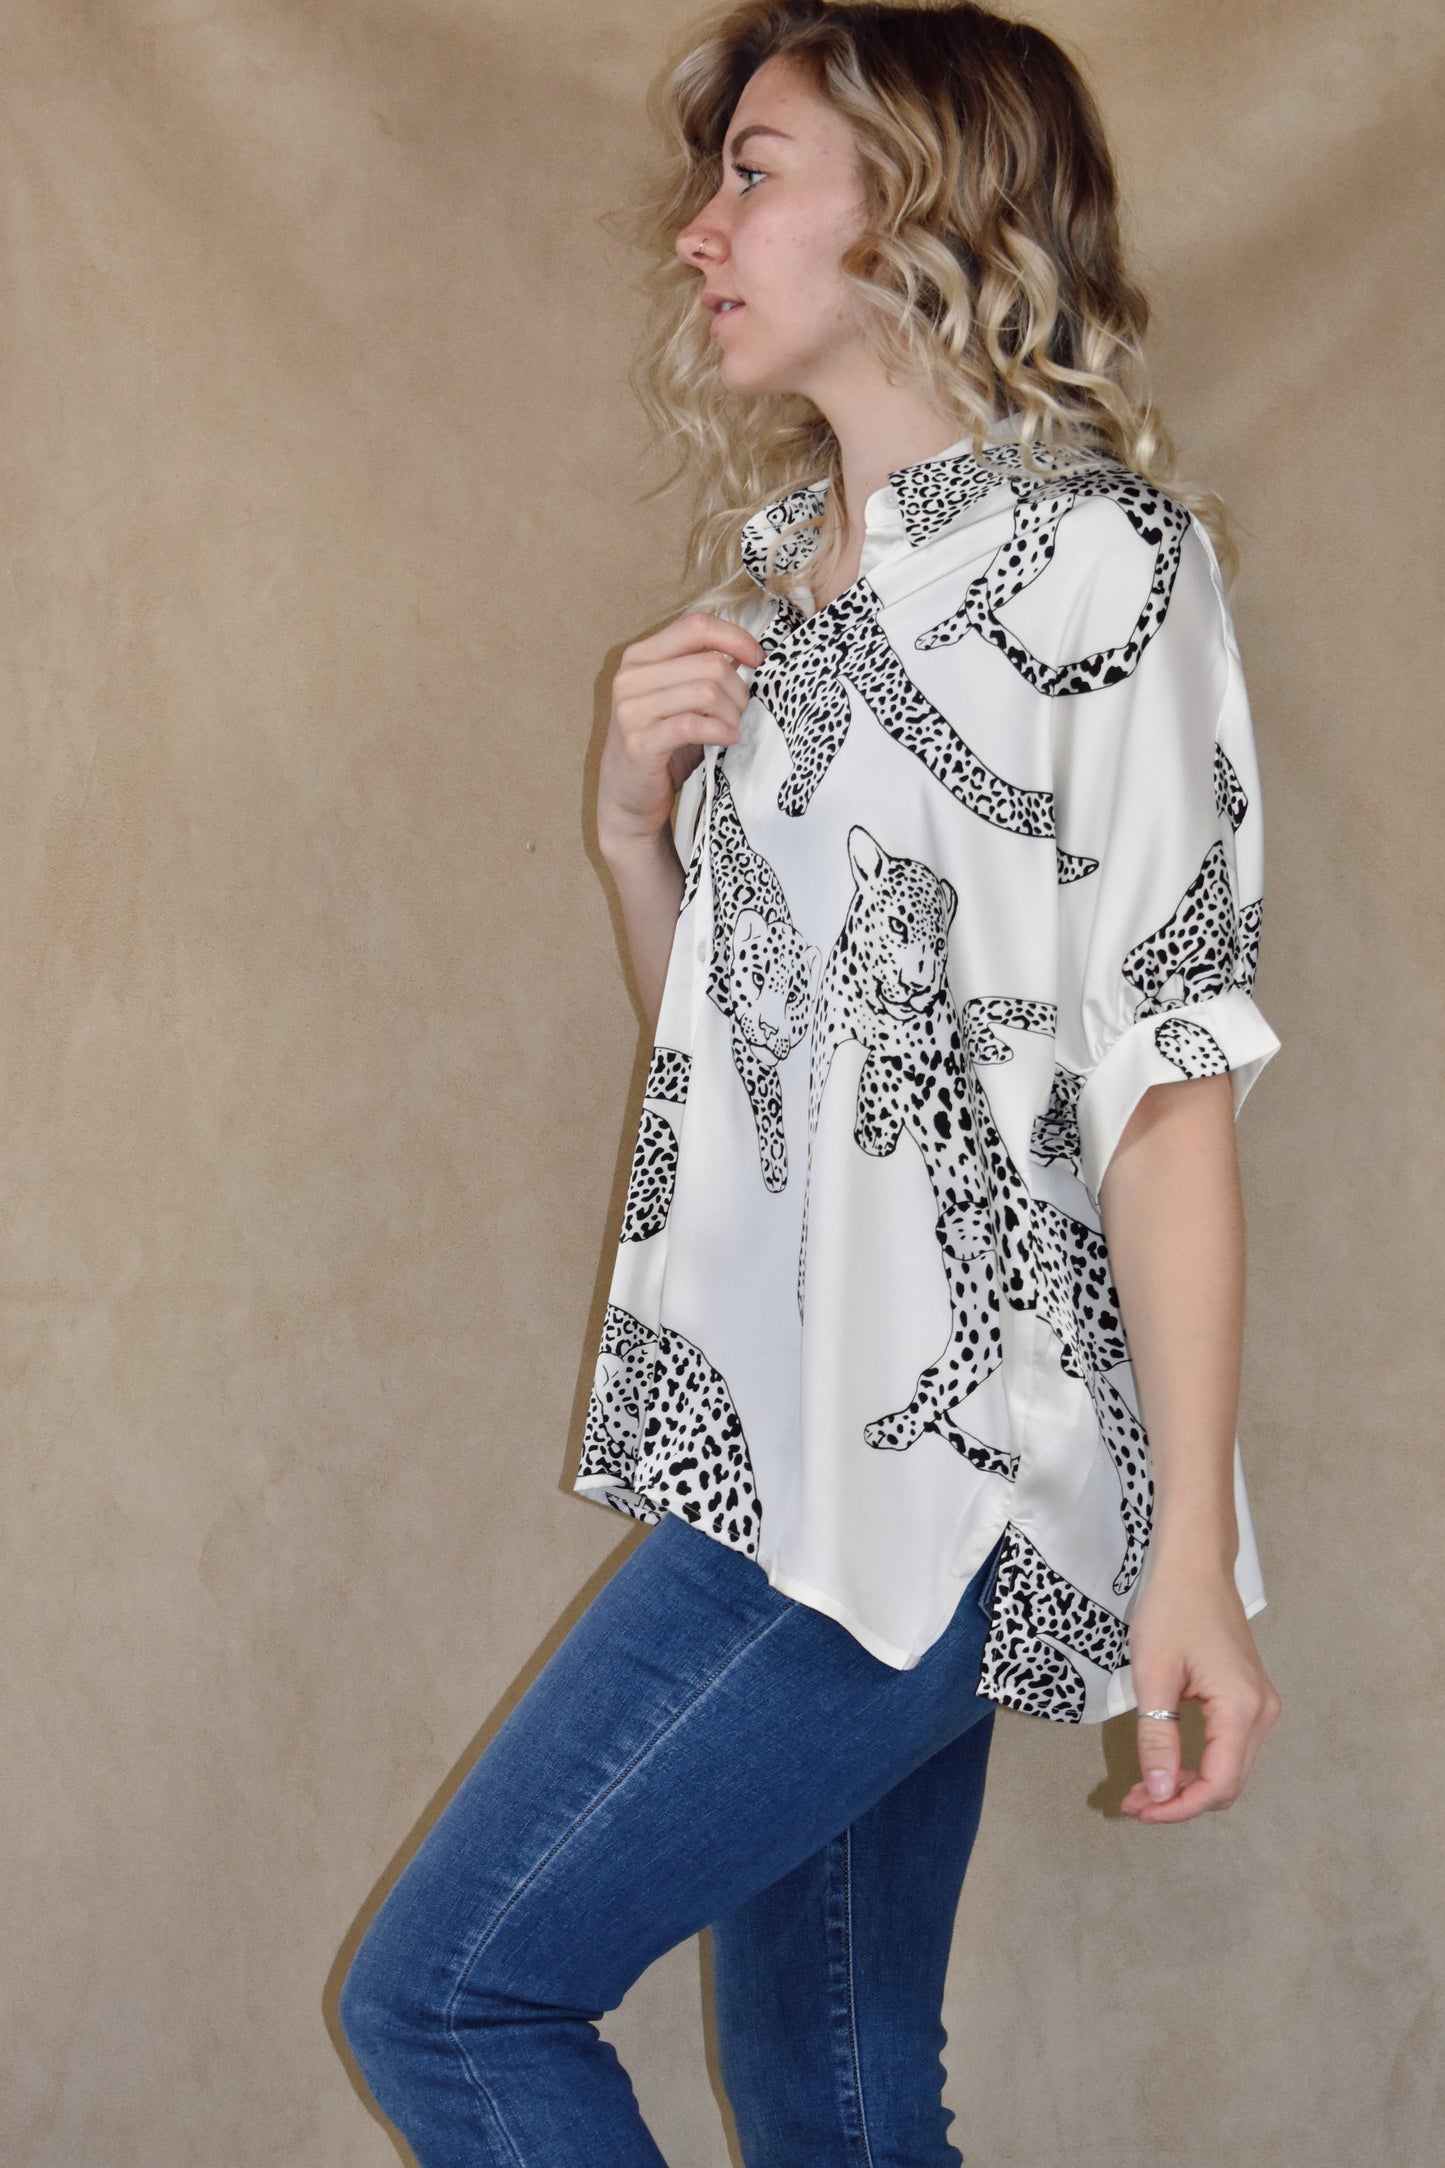 satin leopard body print button down blouse with collar and bubble dolman sleeves. oversized fit